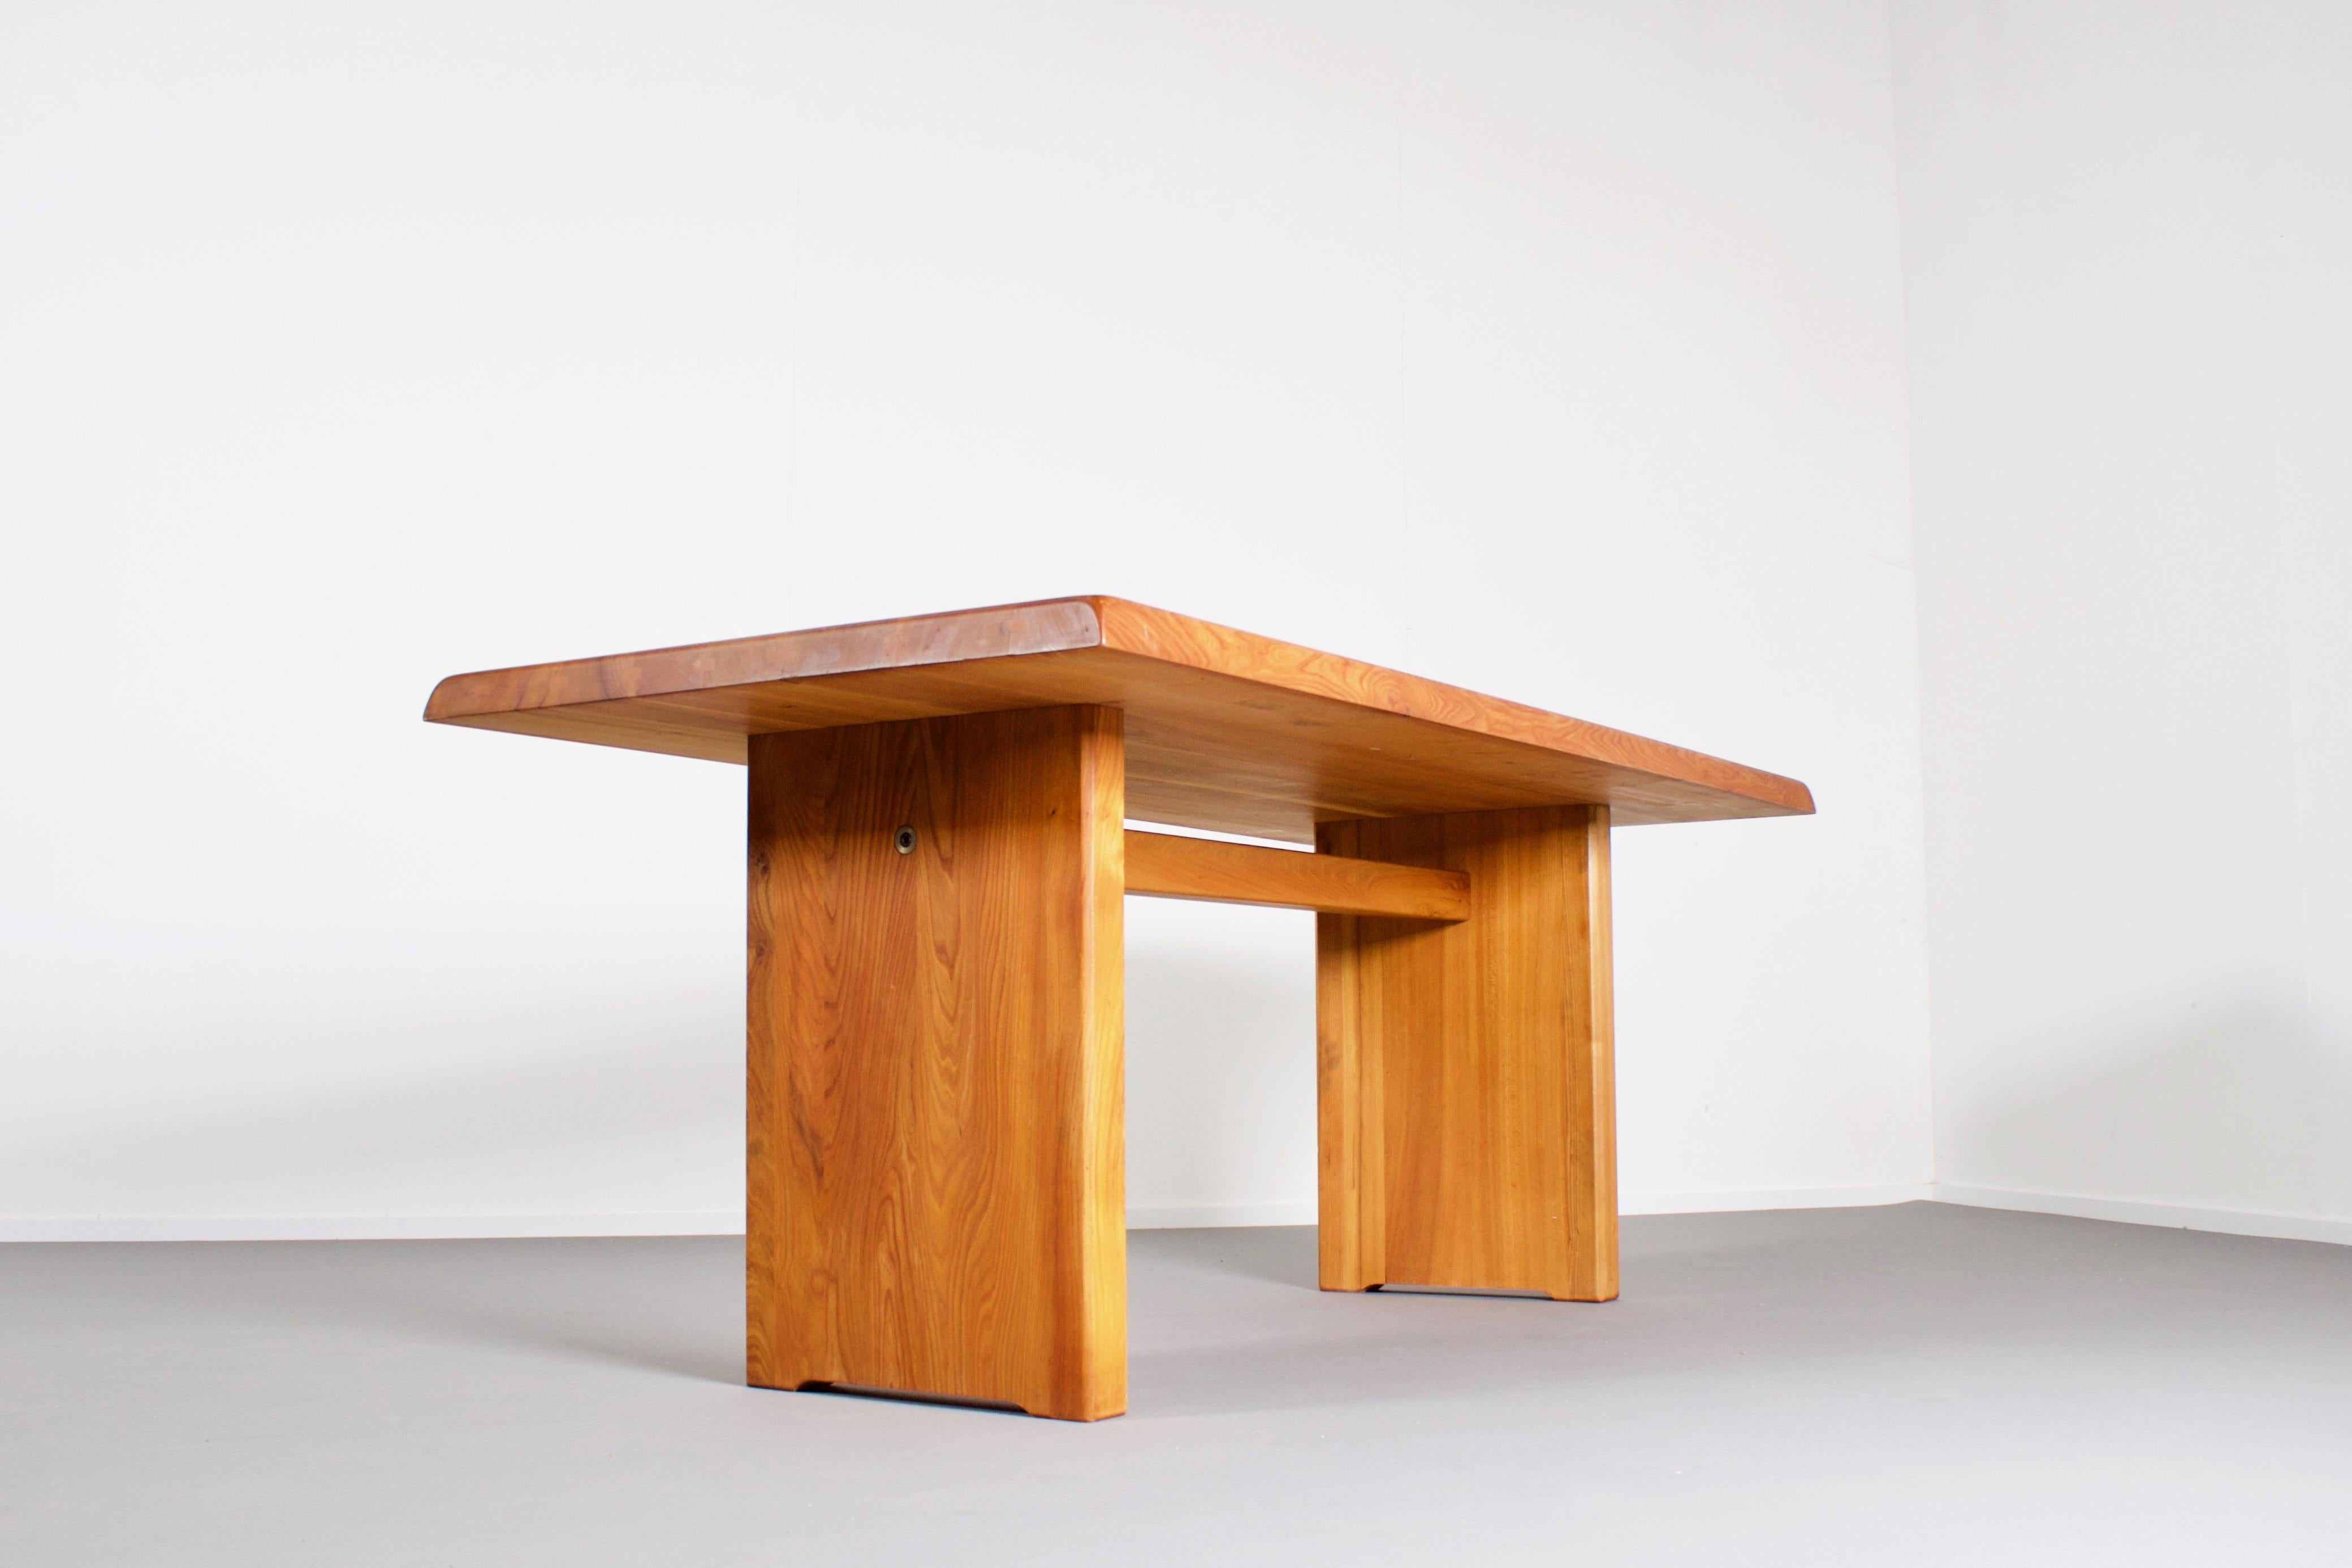 Beautiful T14c dining table in very good condition. 

Designed and manufactured by Pierre Chapo in the 1960s.

This table is made of solid elmwood. 

The design is simplistic and therefore the grain and natural character of the wood is nicely